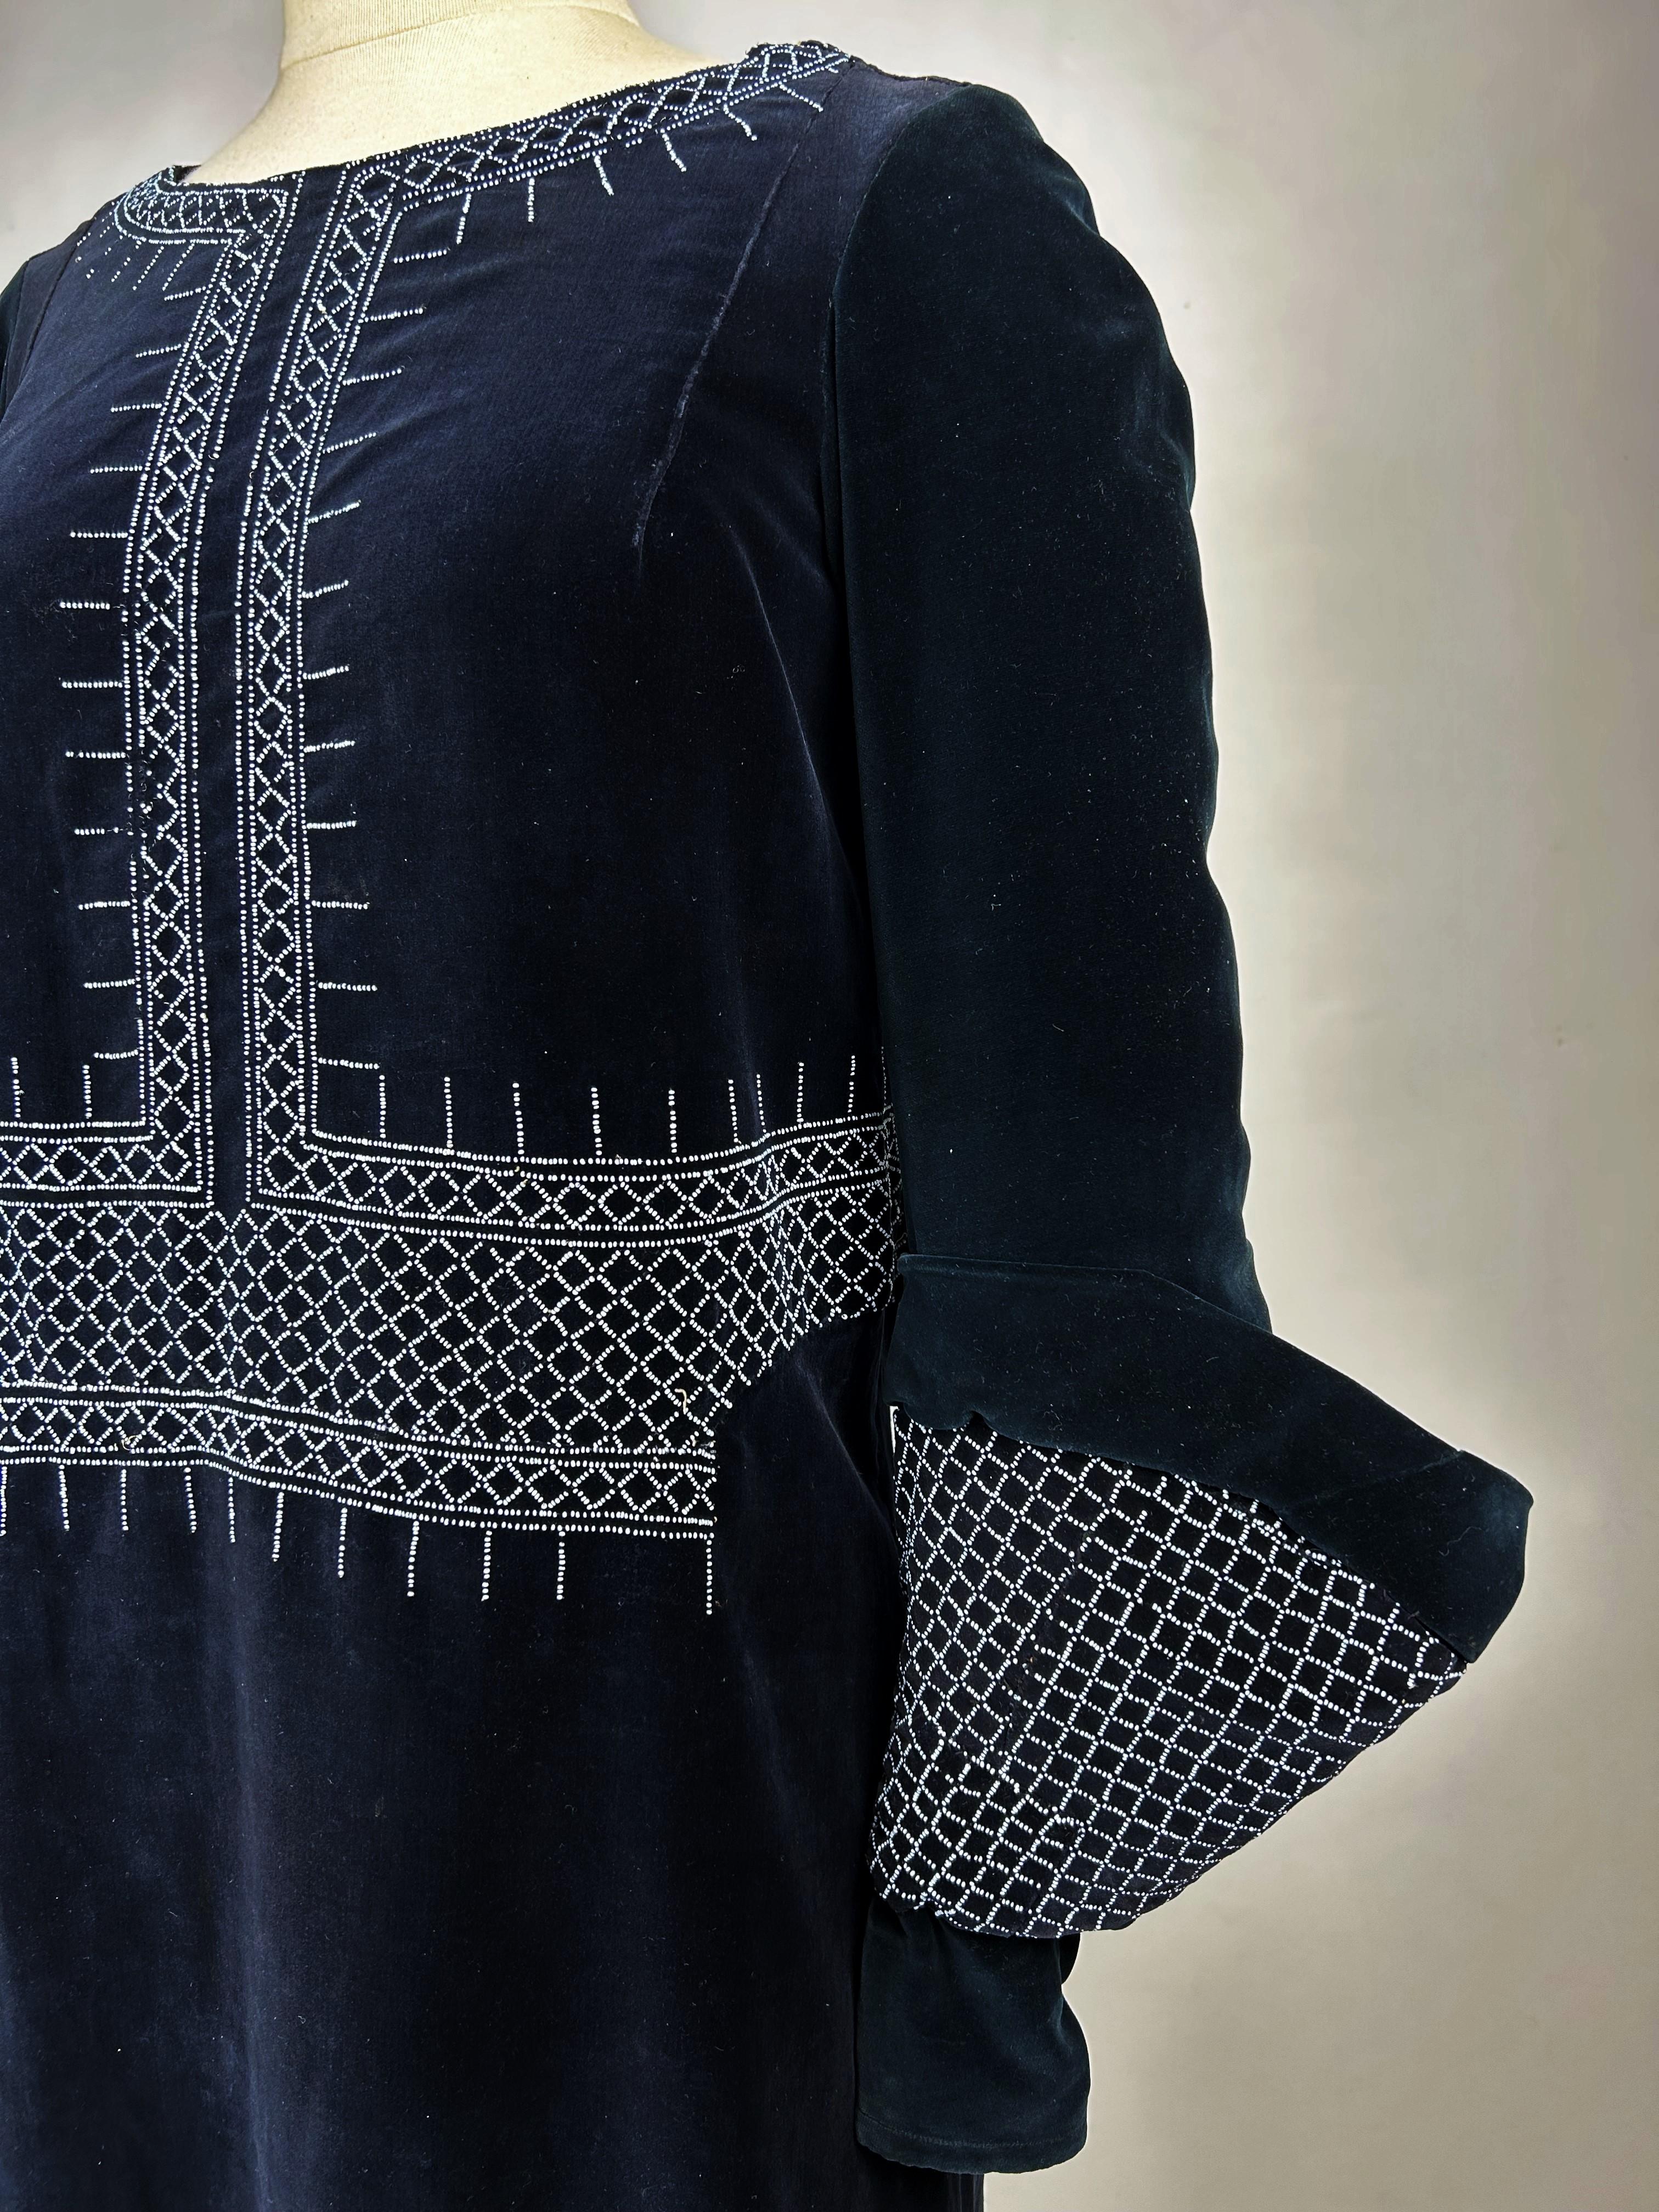 A Navy Velvet Sac Dress with glass beads embroideries - France Circa 1925-1930 For Sale 3